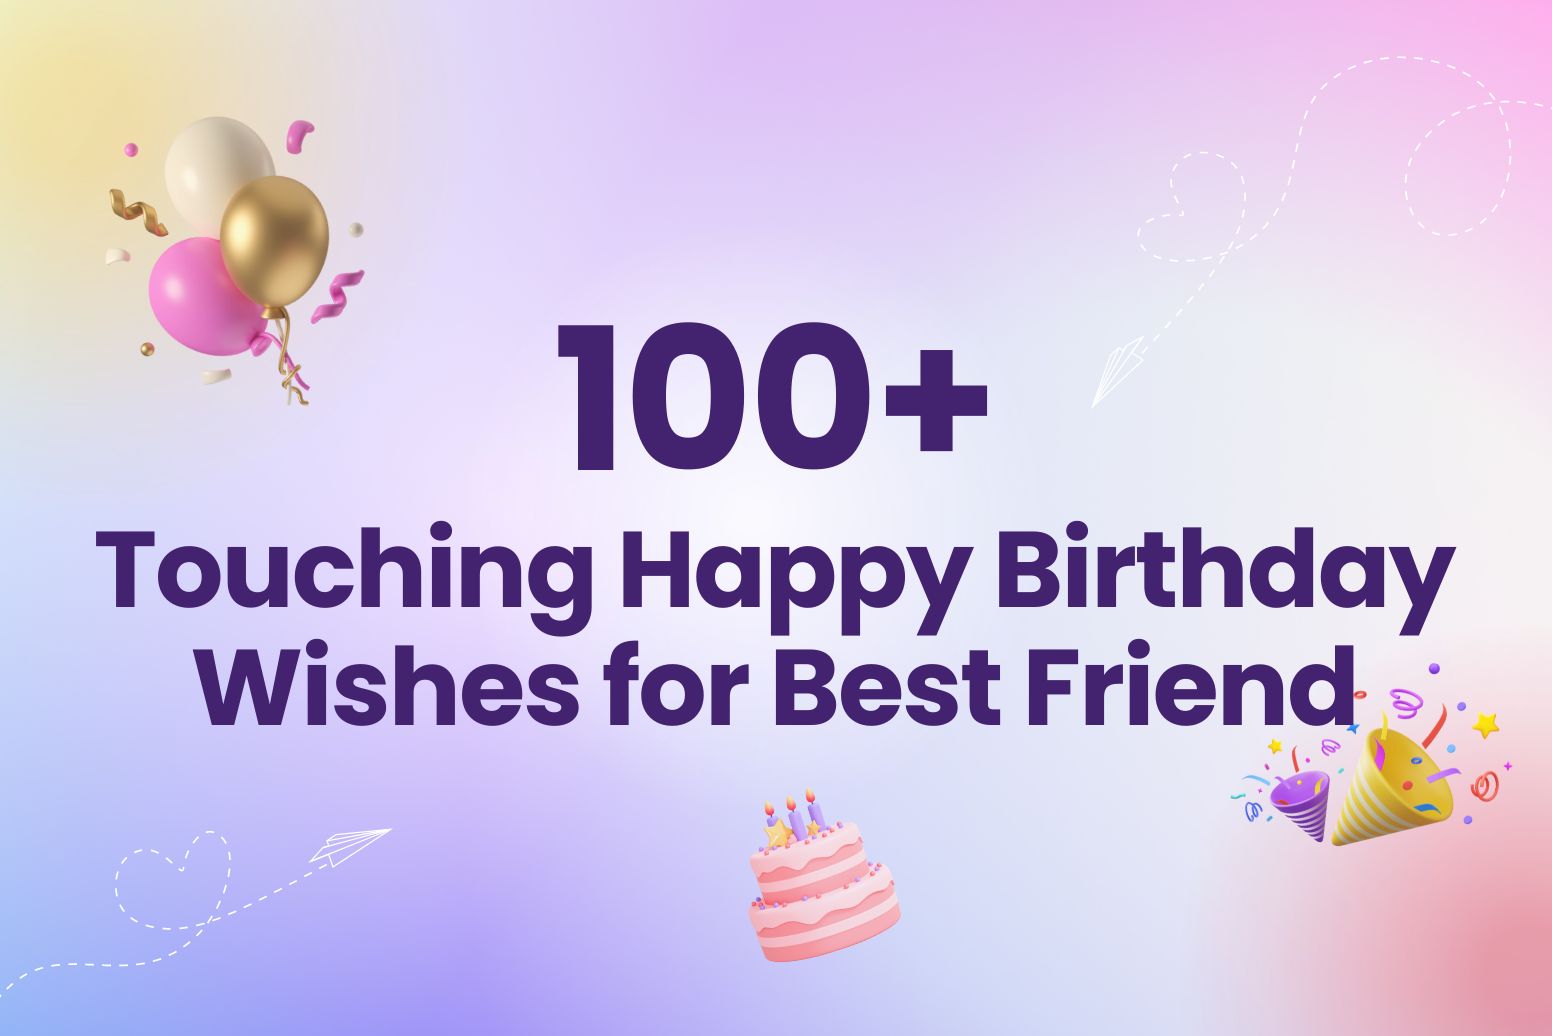 100+ Touching Happy Birthday Wishes for Best Friend